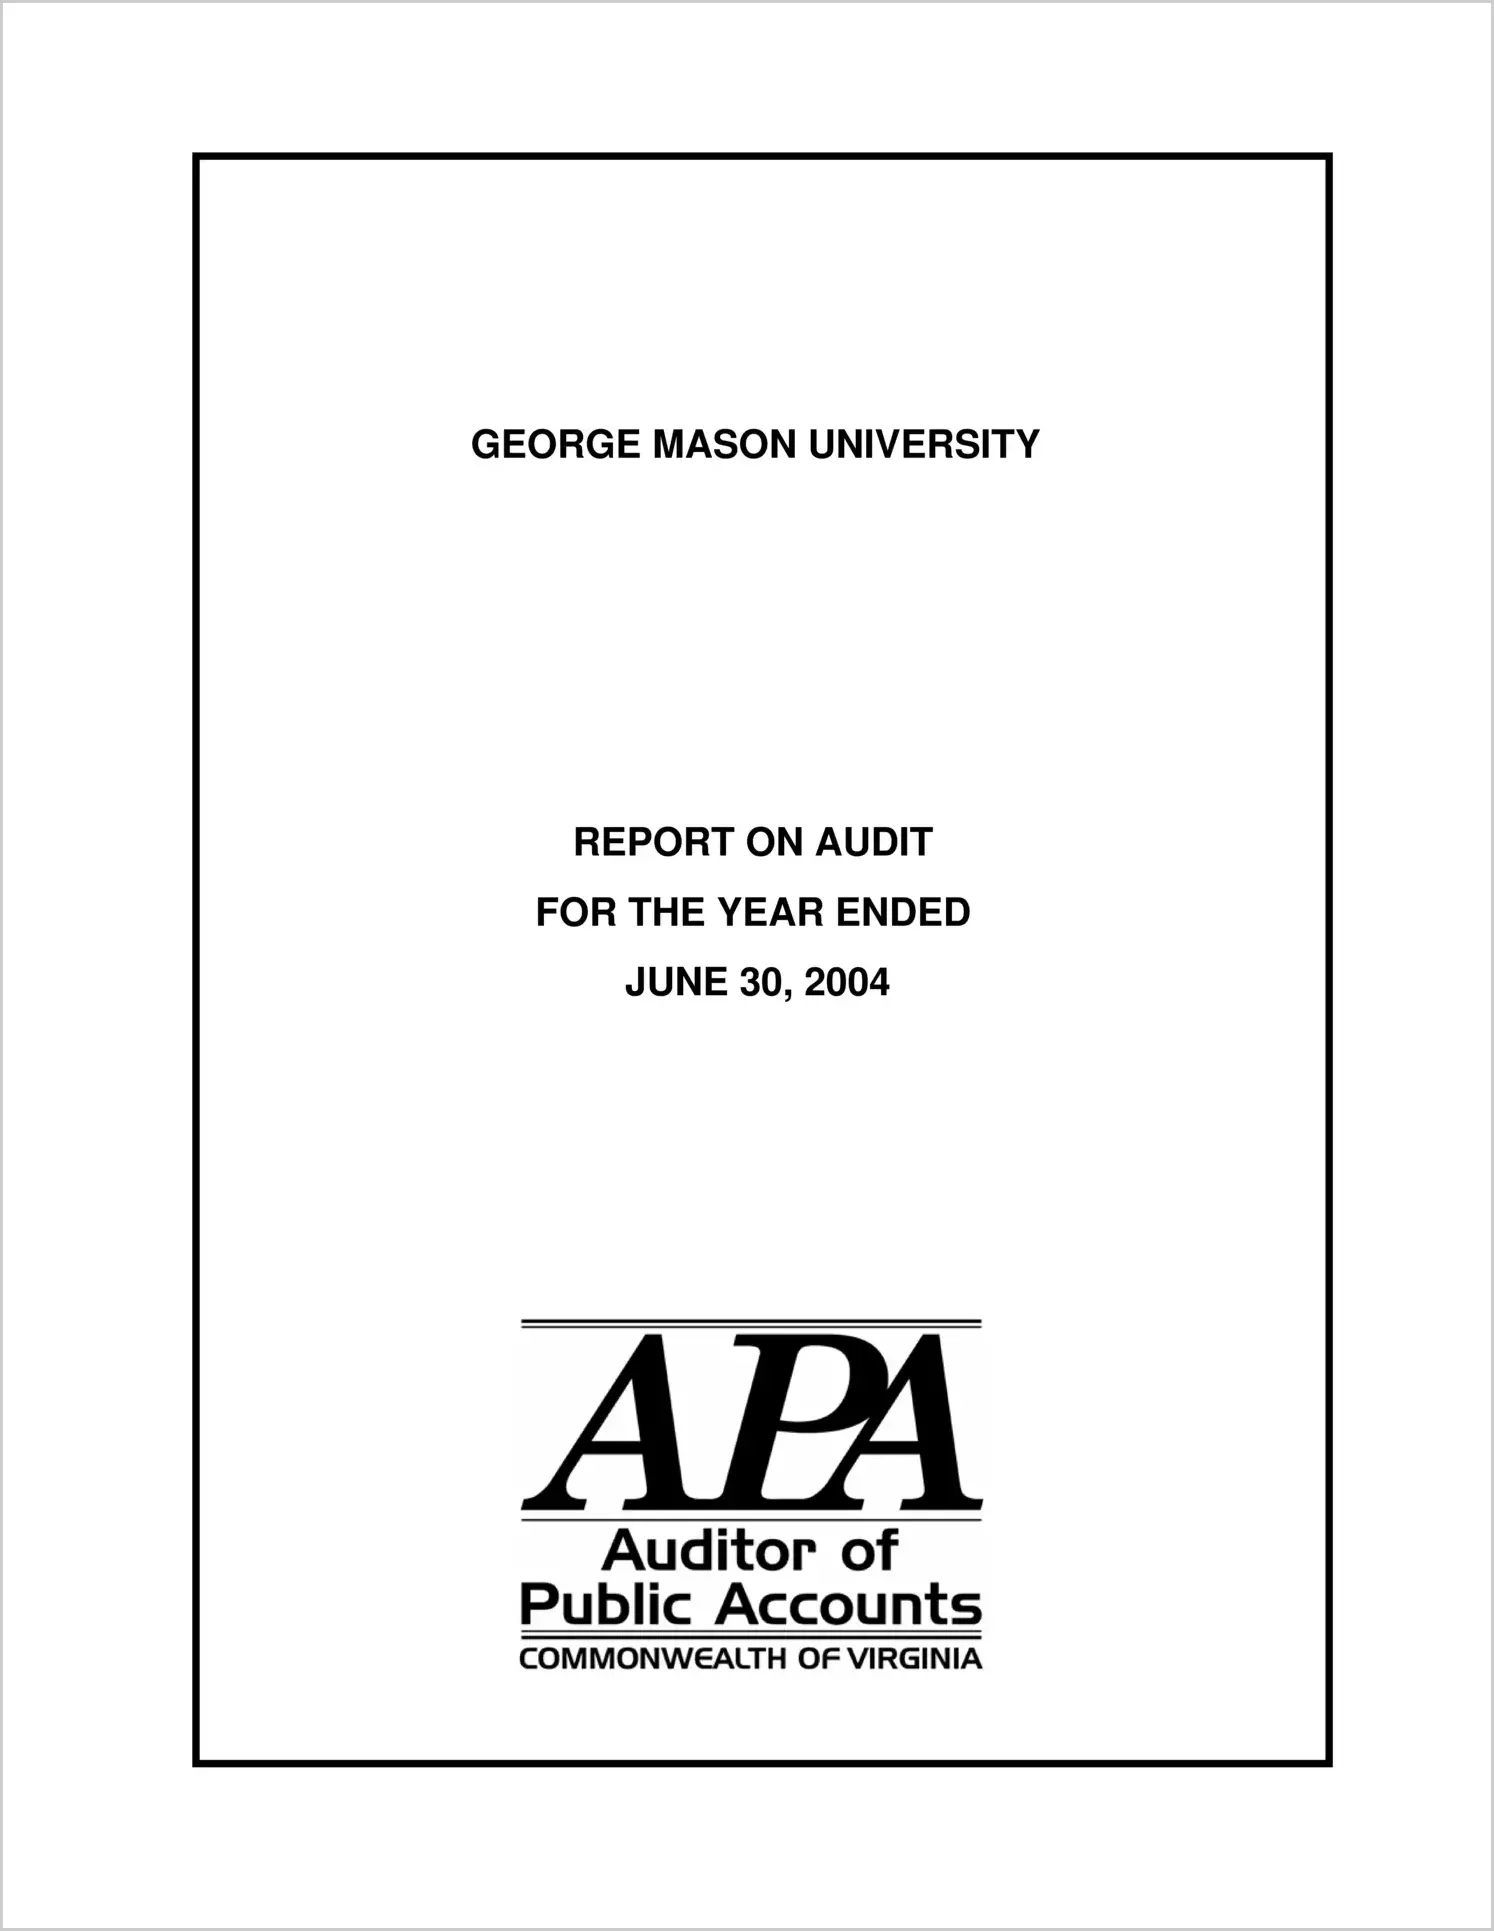 George Mason University for the year ended June 30, 2004